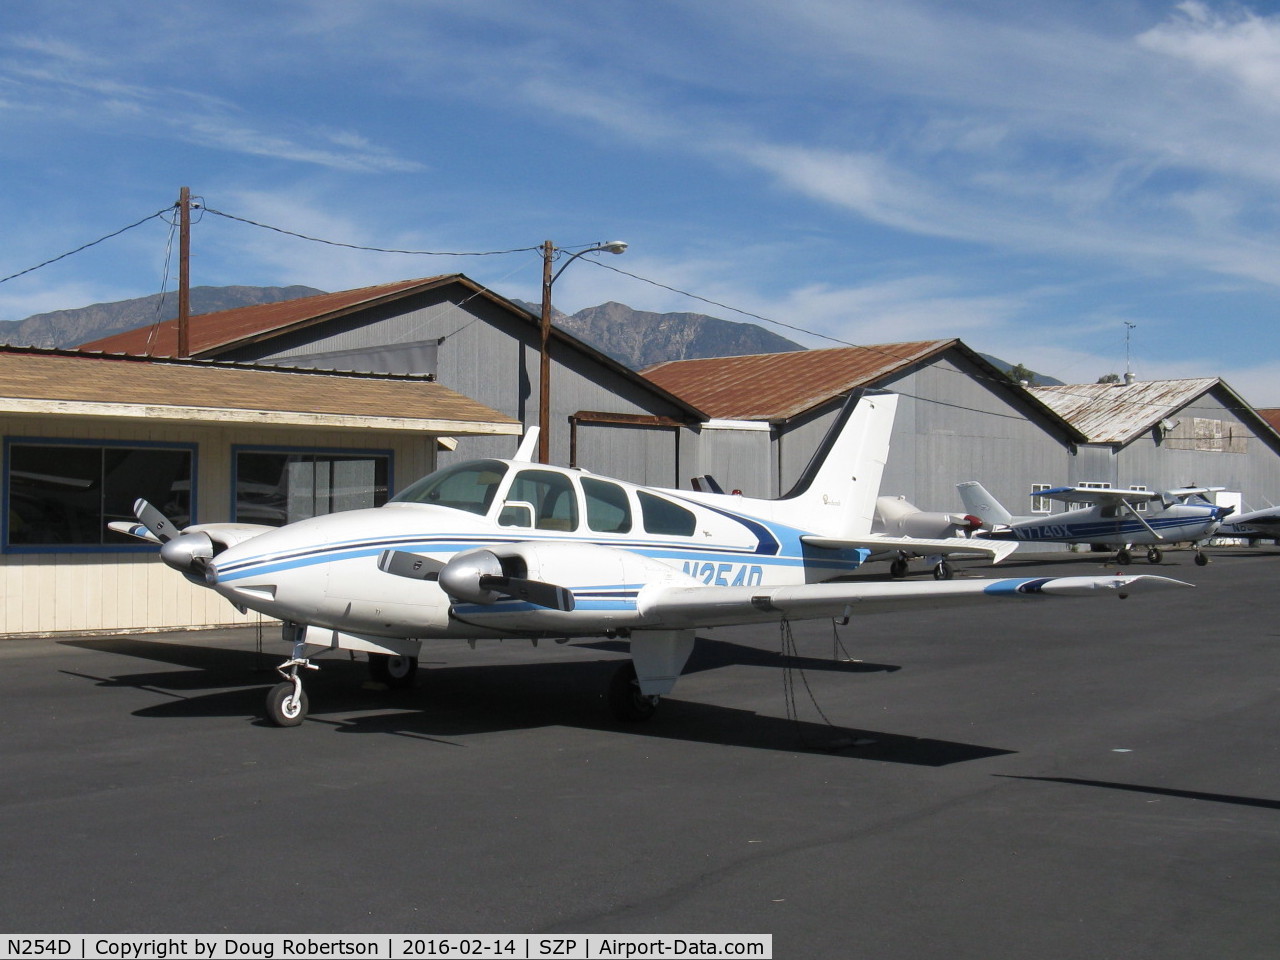 N254D, 1962 Beech 95-A55 Baron C/N TC-339, 1962 Beech 95-A55 Baron, two Continental IO-470-L 260 Hp each. First year of Baron with six-seat option